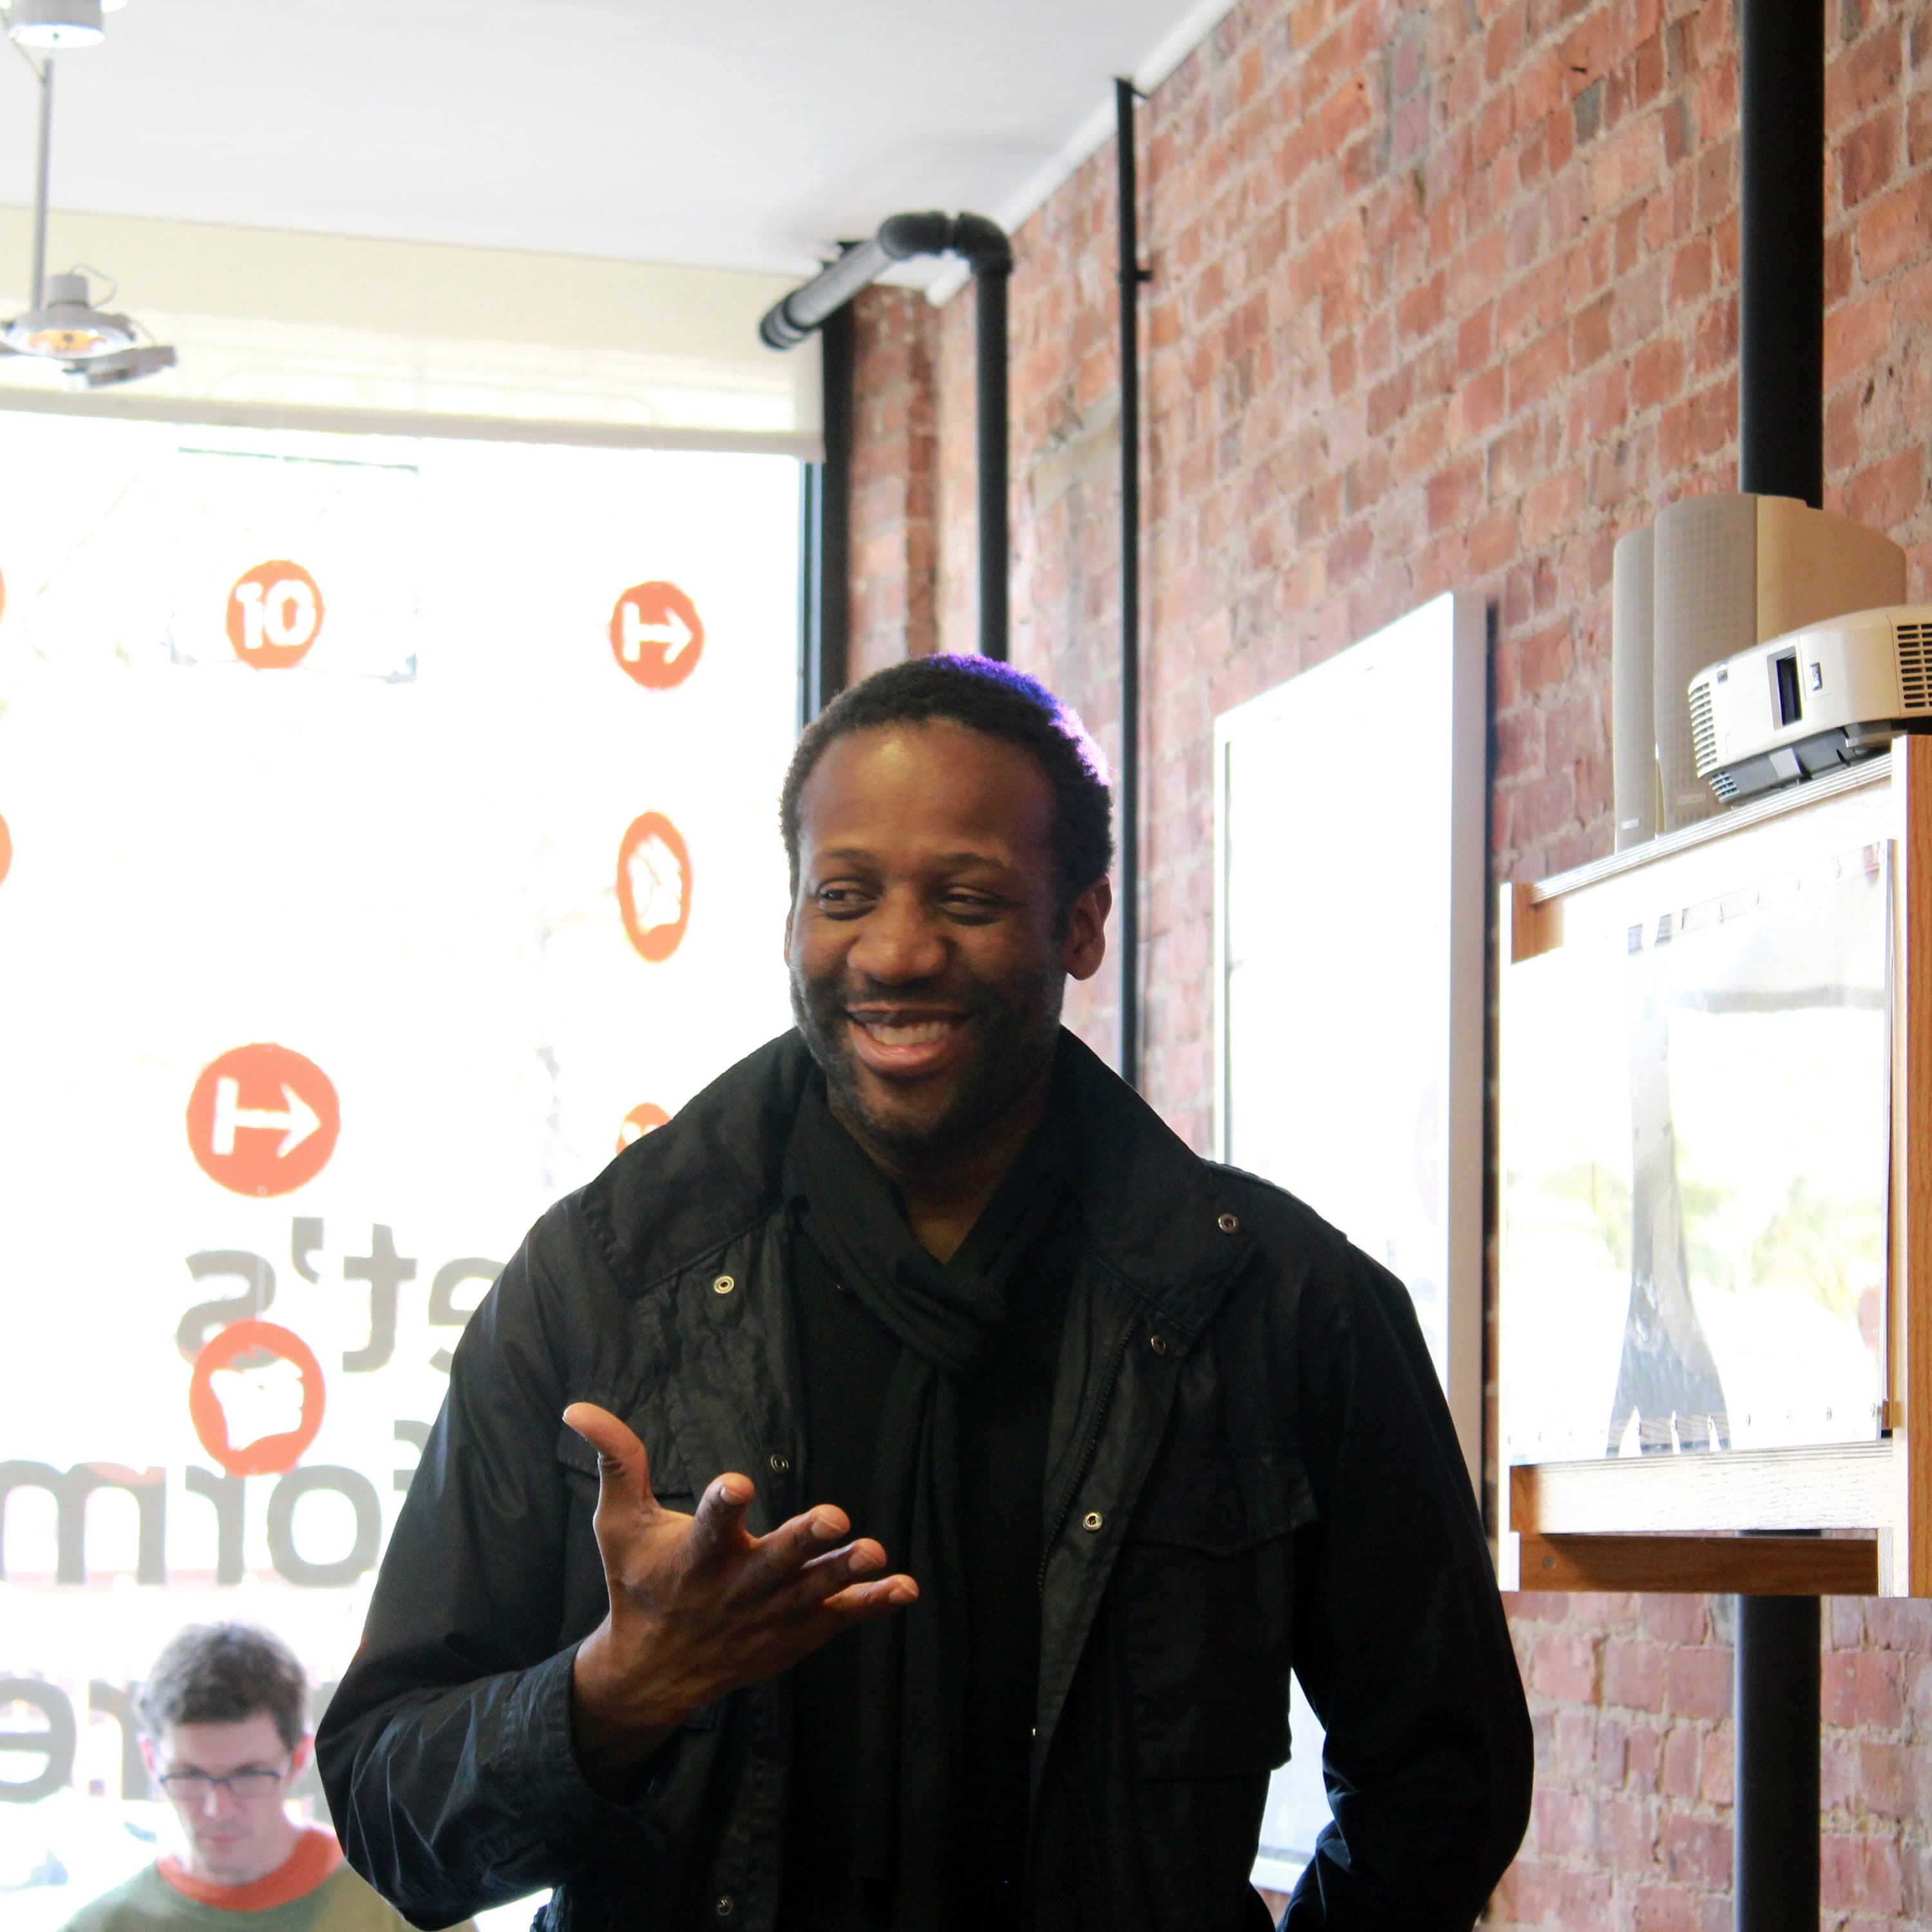 A person in a black jacket and scarf is smiling while giving a speech in a room with exposed brick walls. There are shelves, a window displaying a logo with orange symbols, and a person with glasses in the background.